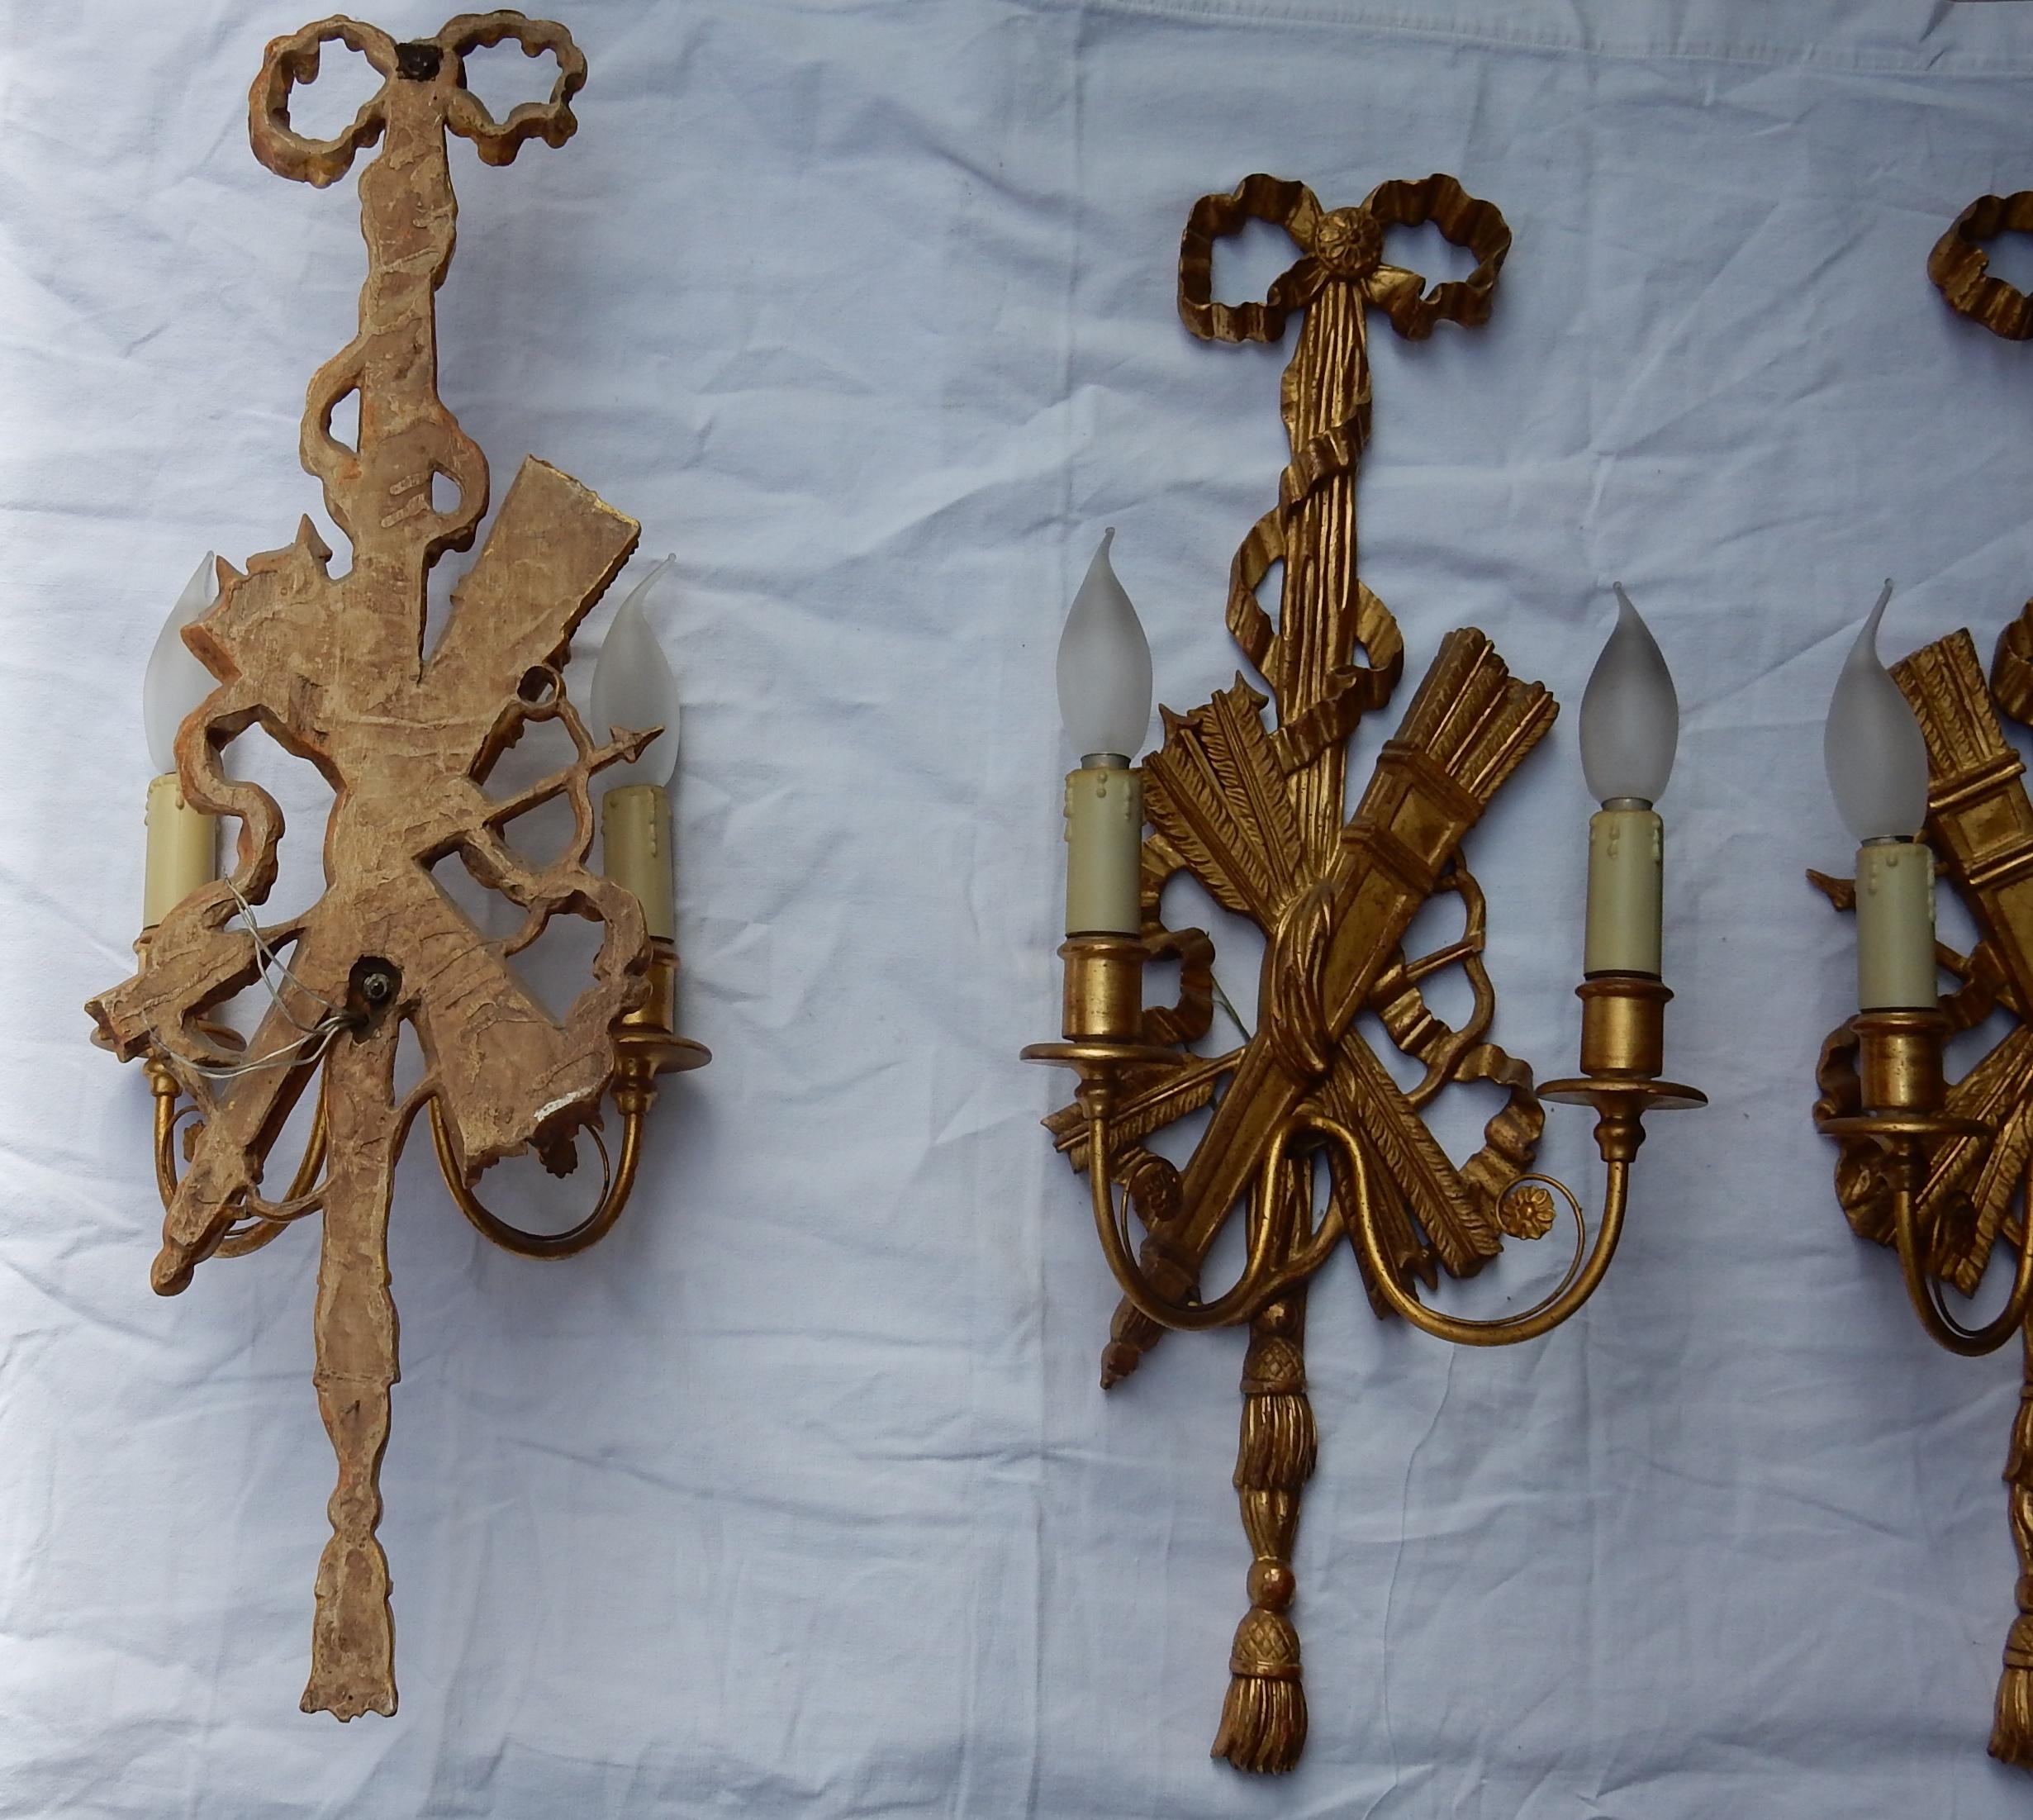 2 Pair of Sconces, Golden Wood and Golden Iron Attributes with Arrows, 1950-1970 For Sale 2